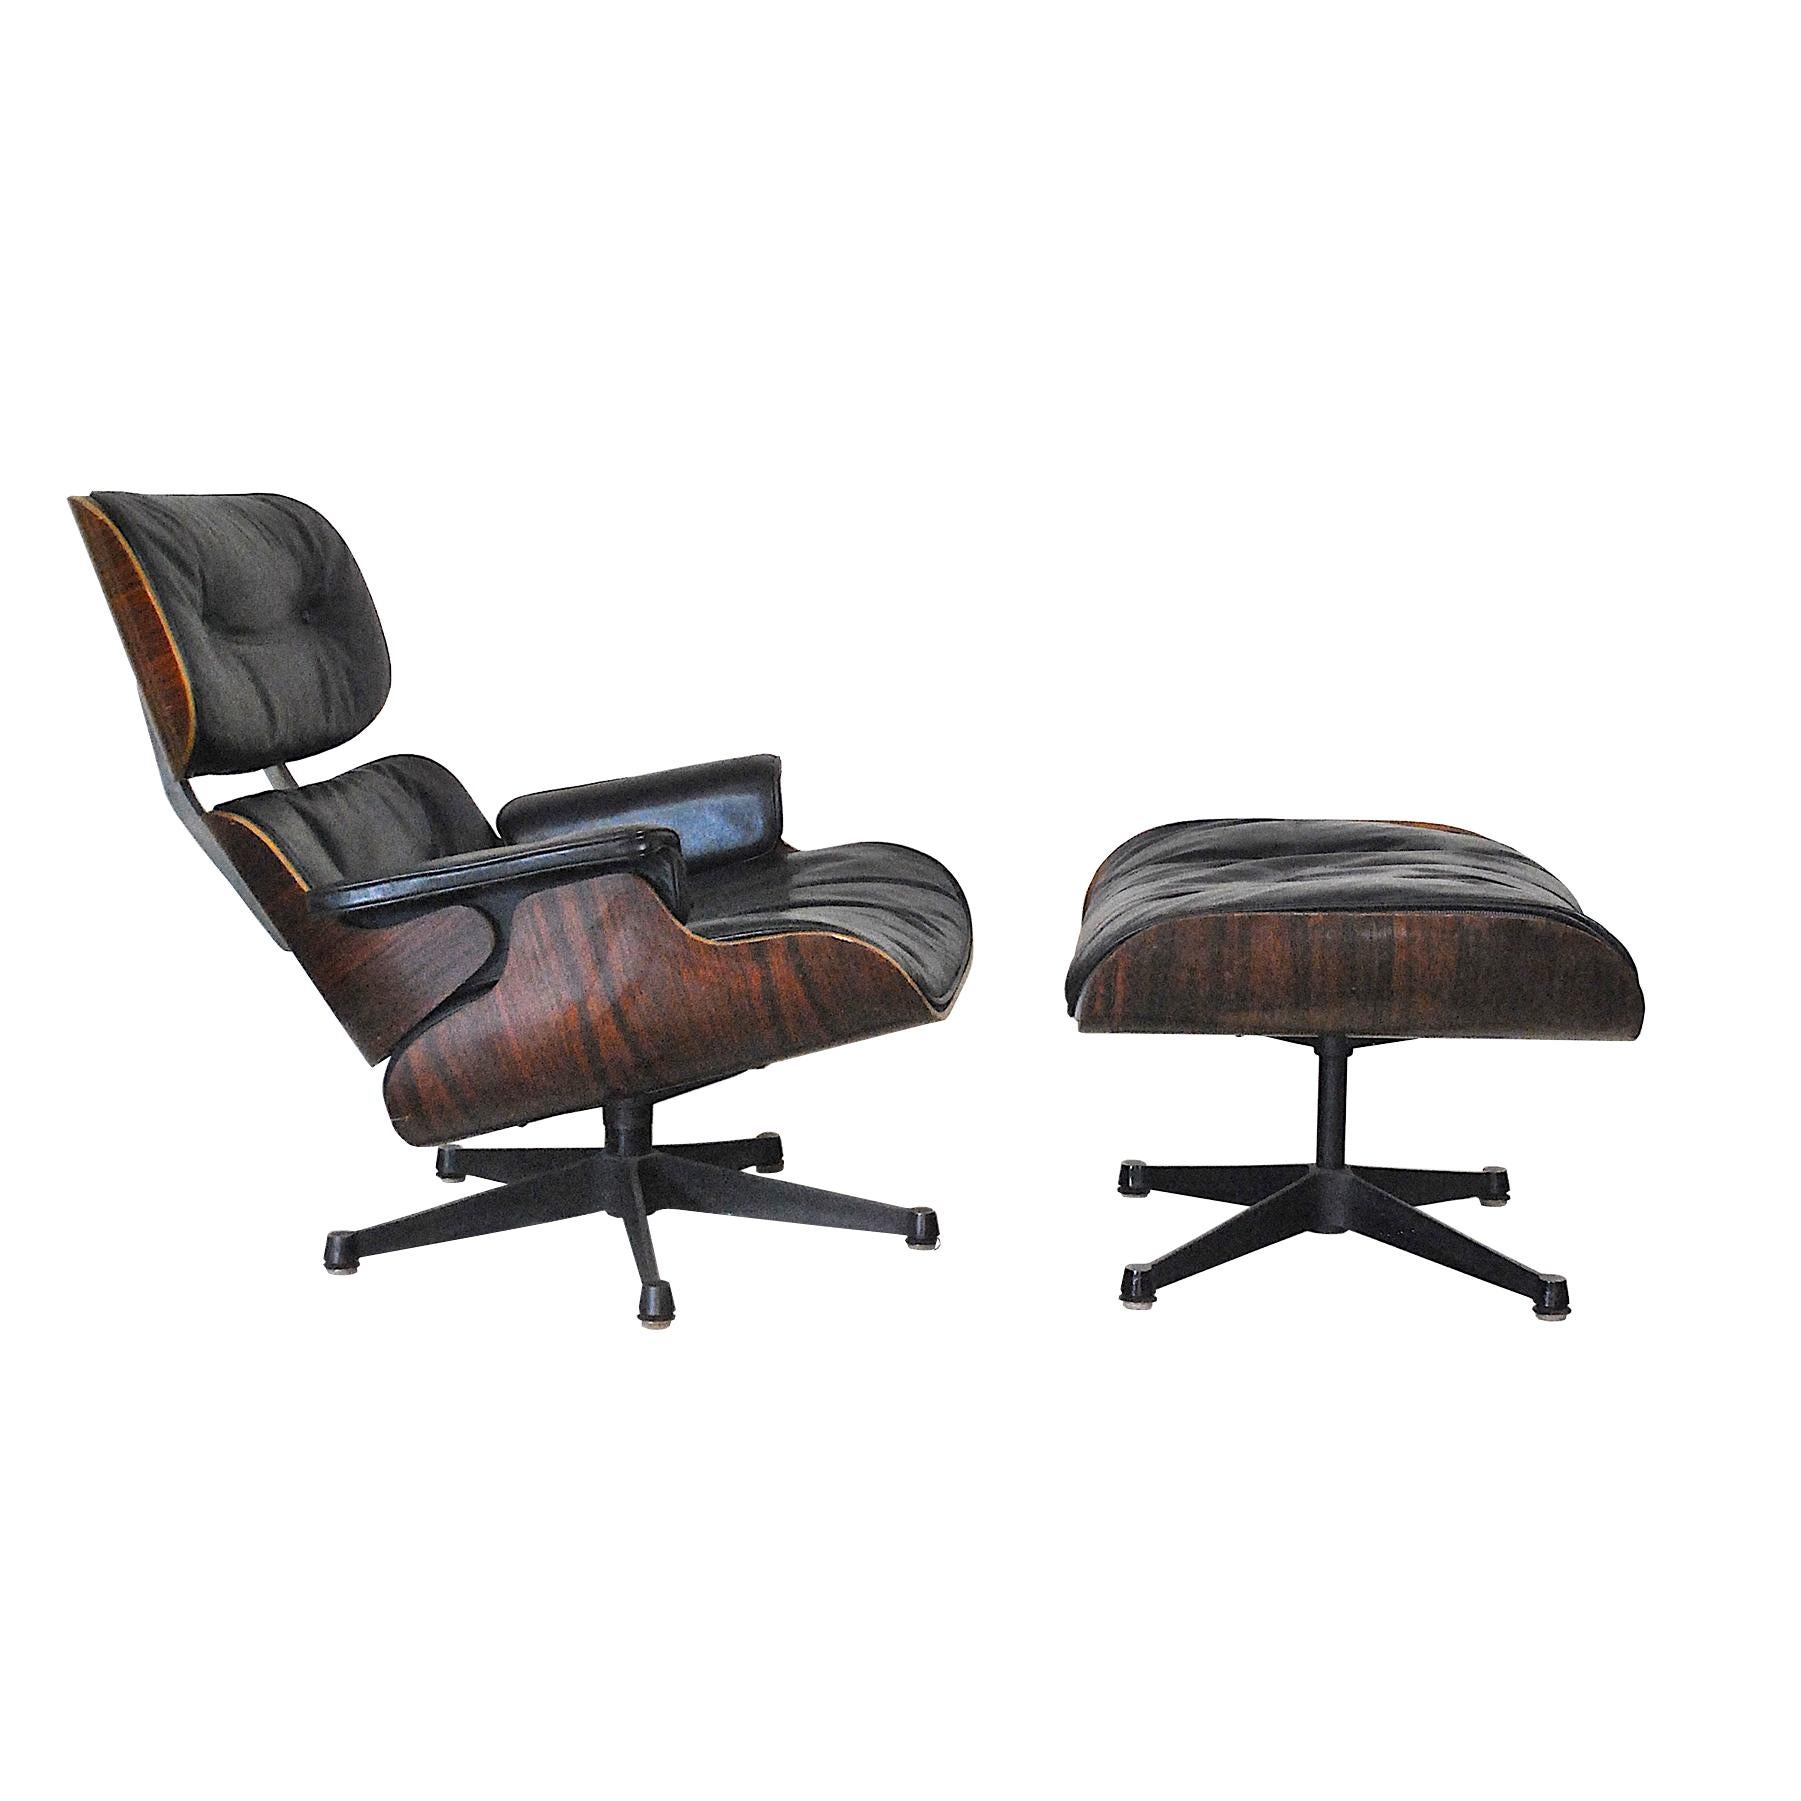 An icon of midcentury. The lounge chair with Pouf, also known as Eames Lounge 670 and Ottoman 671, were both made by the ingenious couple of designers Charles and Ray Eames for the American company Herman Miller.